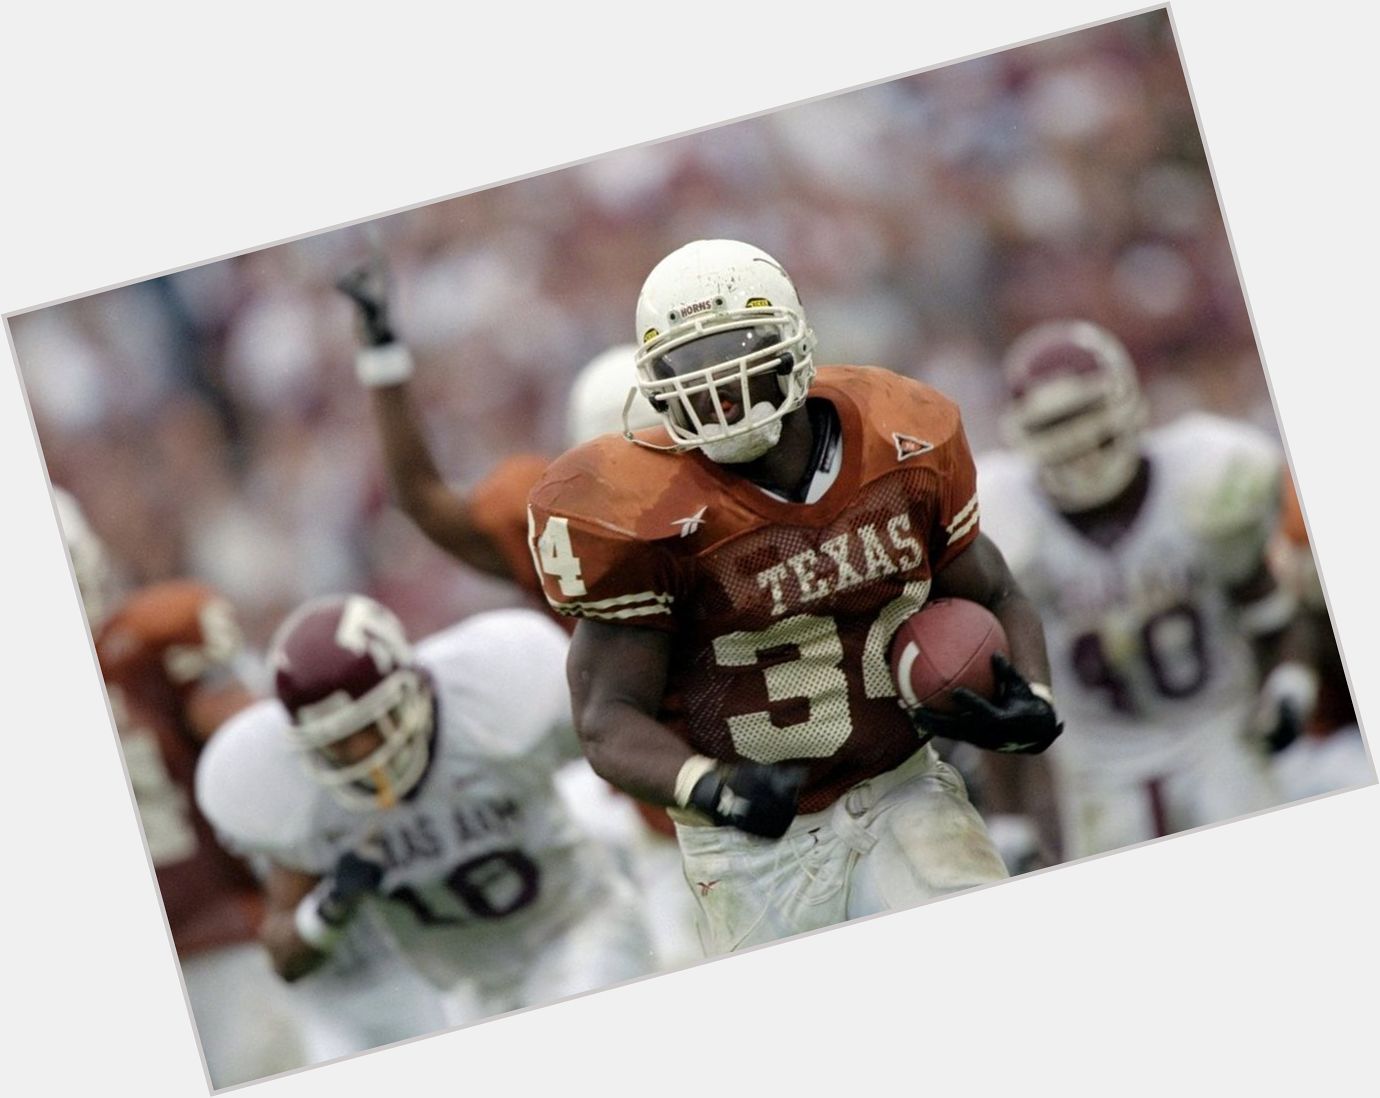 Happy birthday Ricky Williams!

What athlete today has his game? 